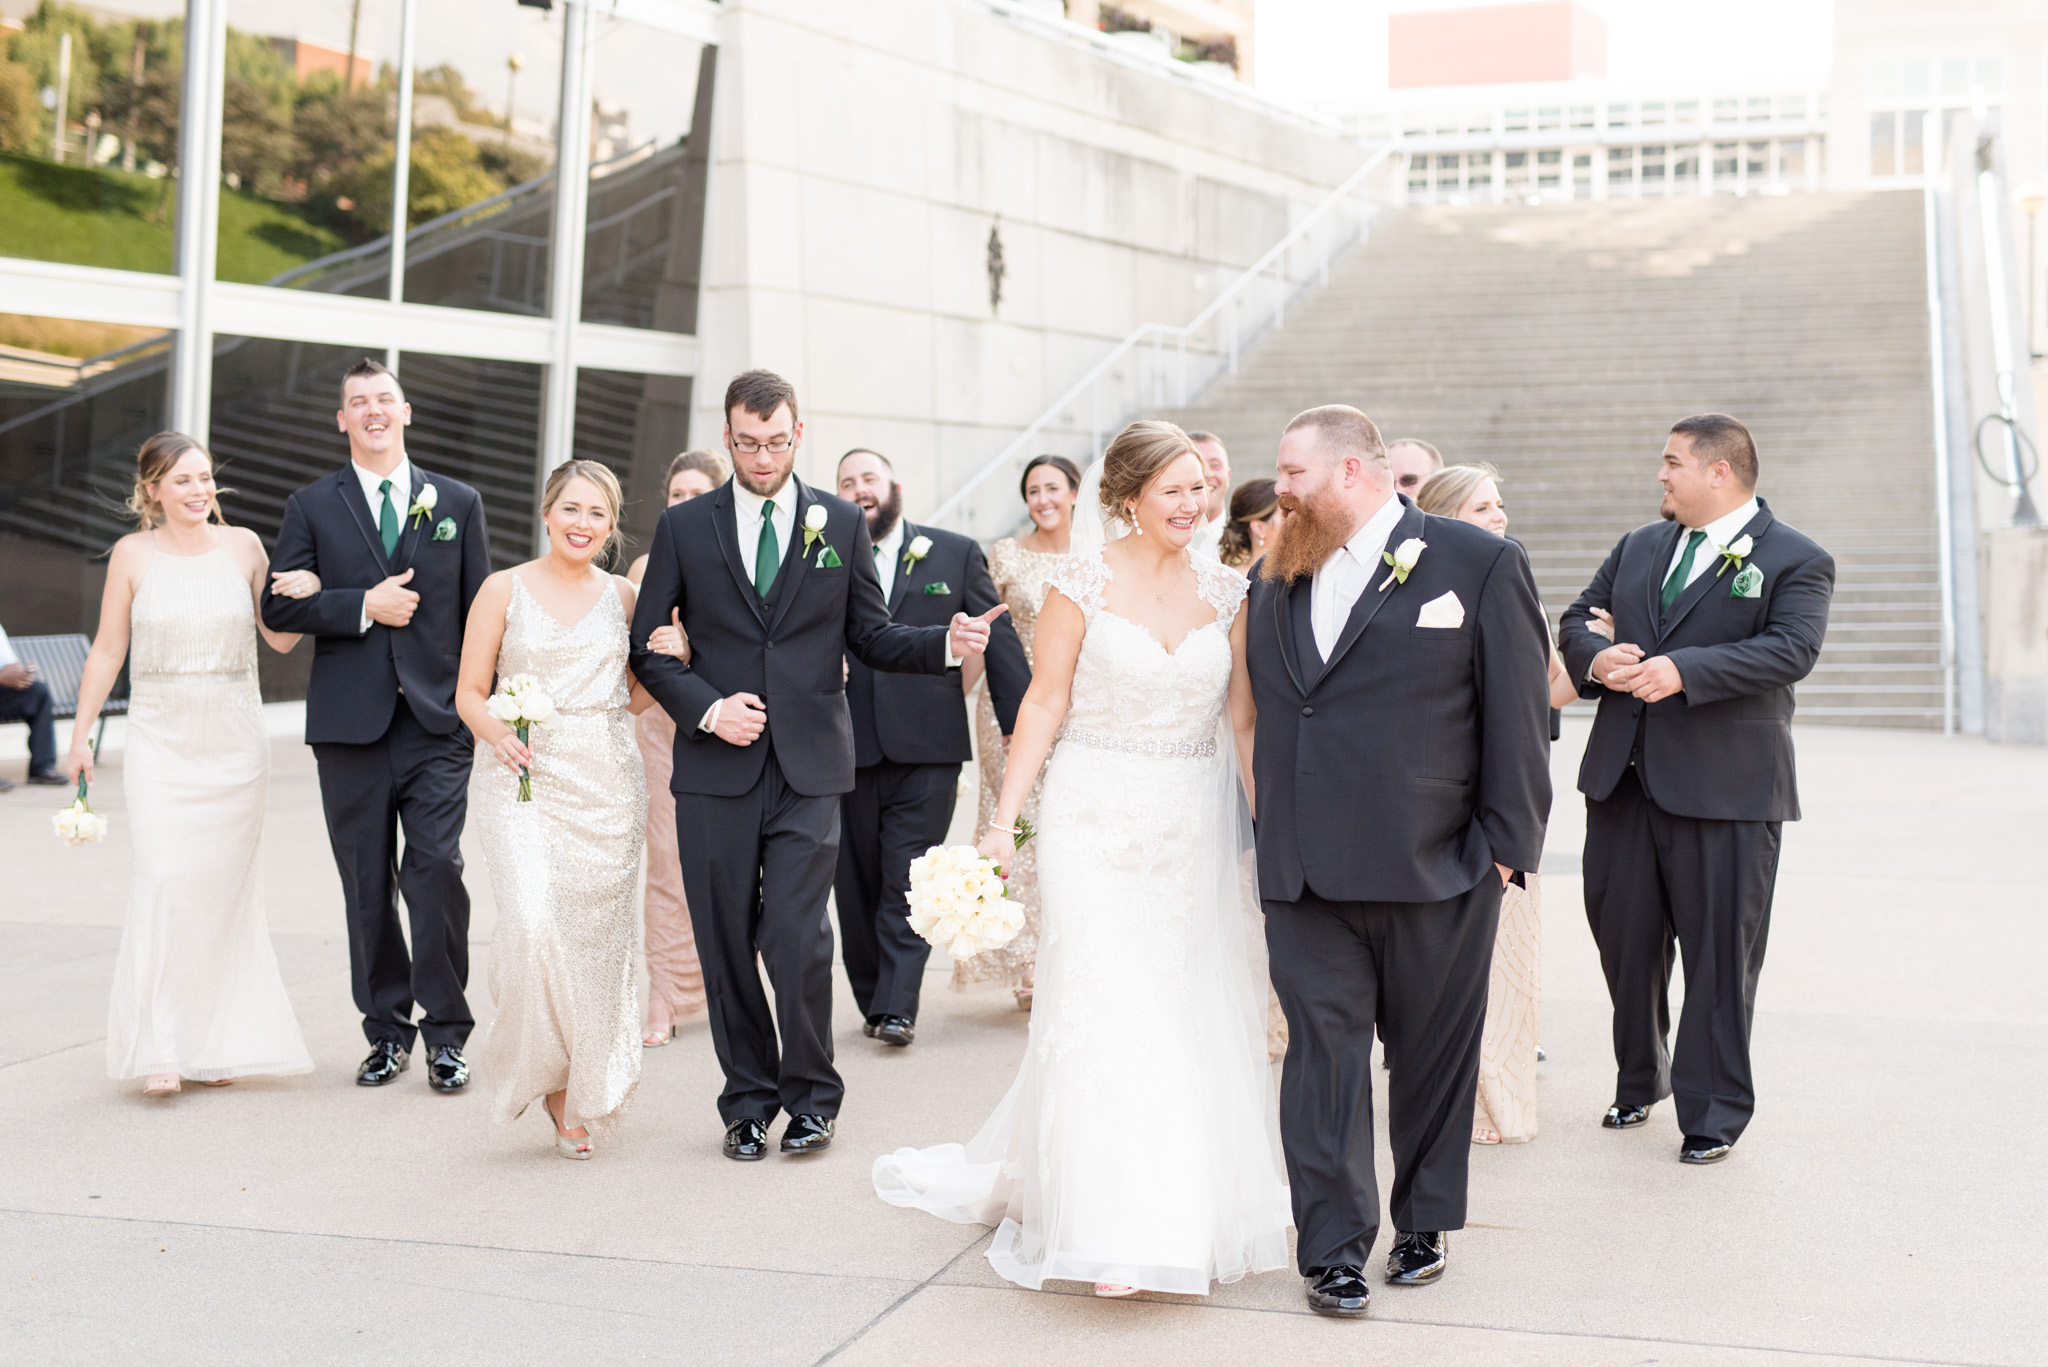 Bride and groom walk with wedding party.